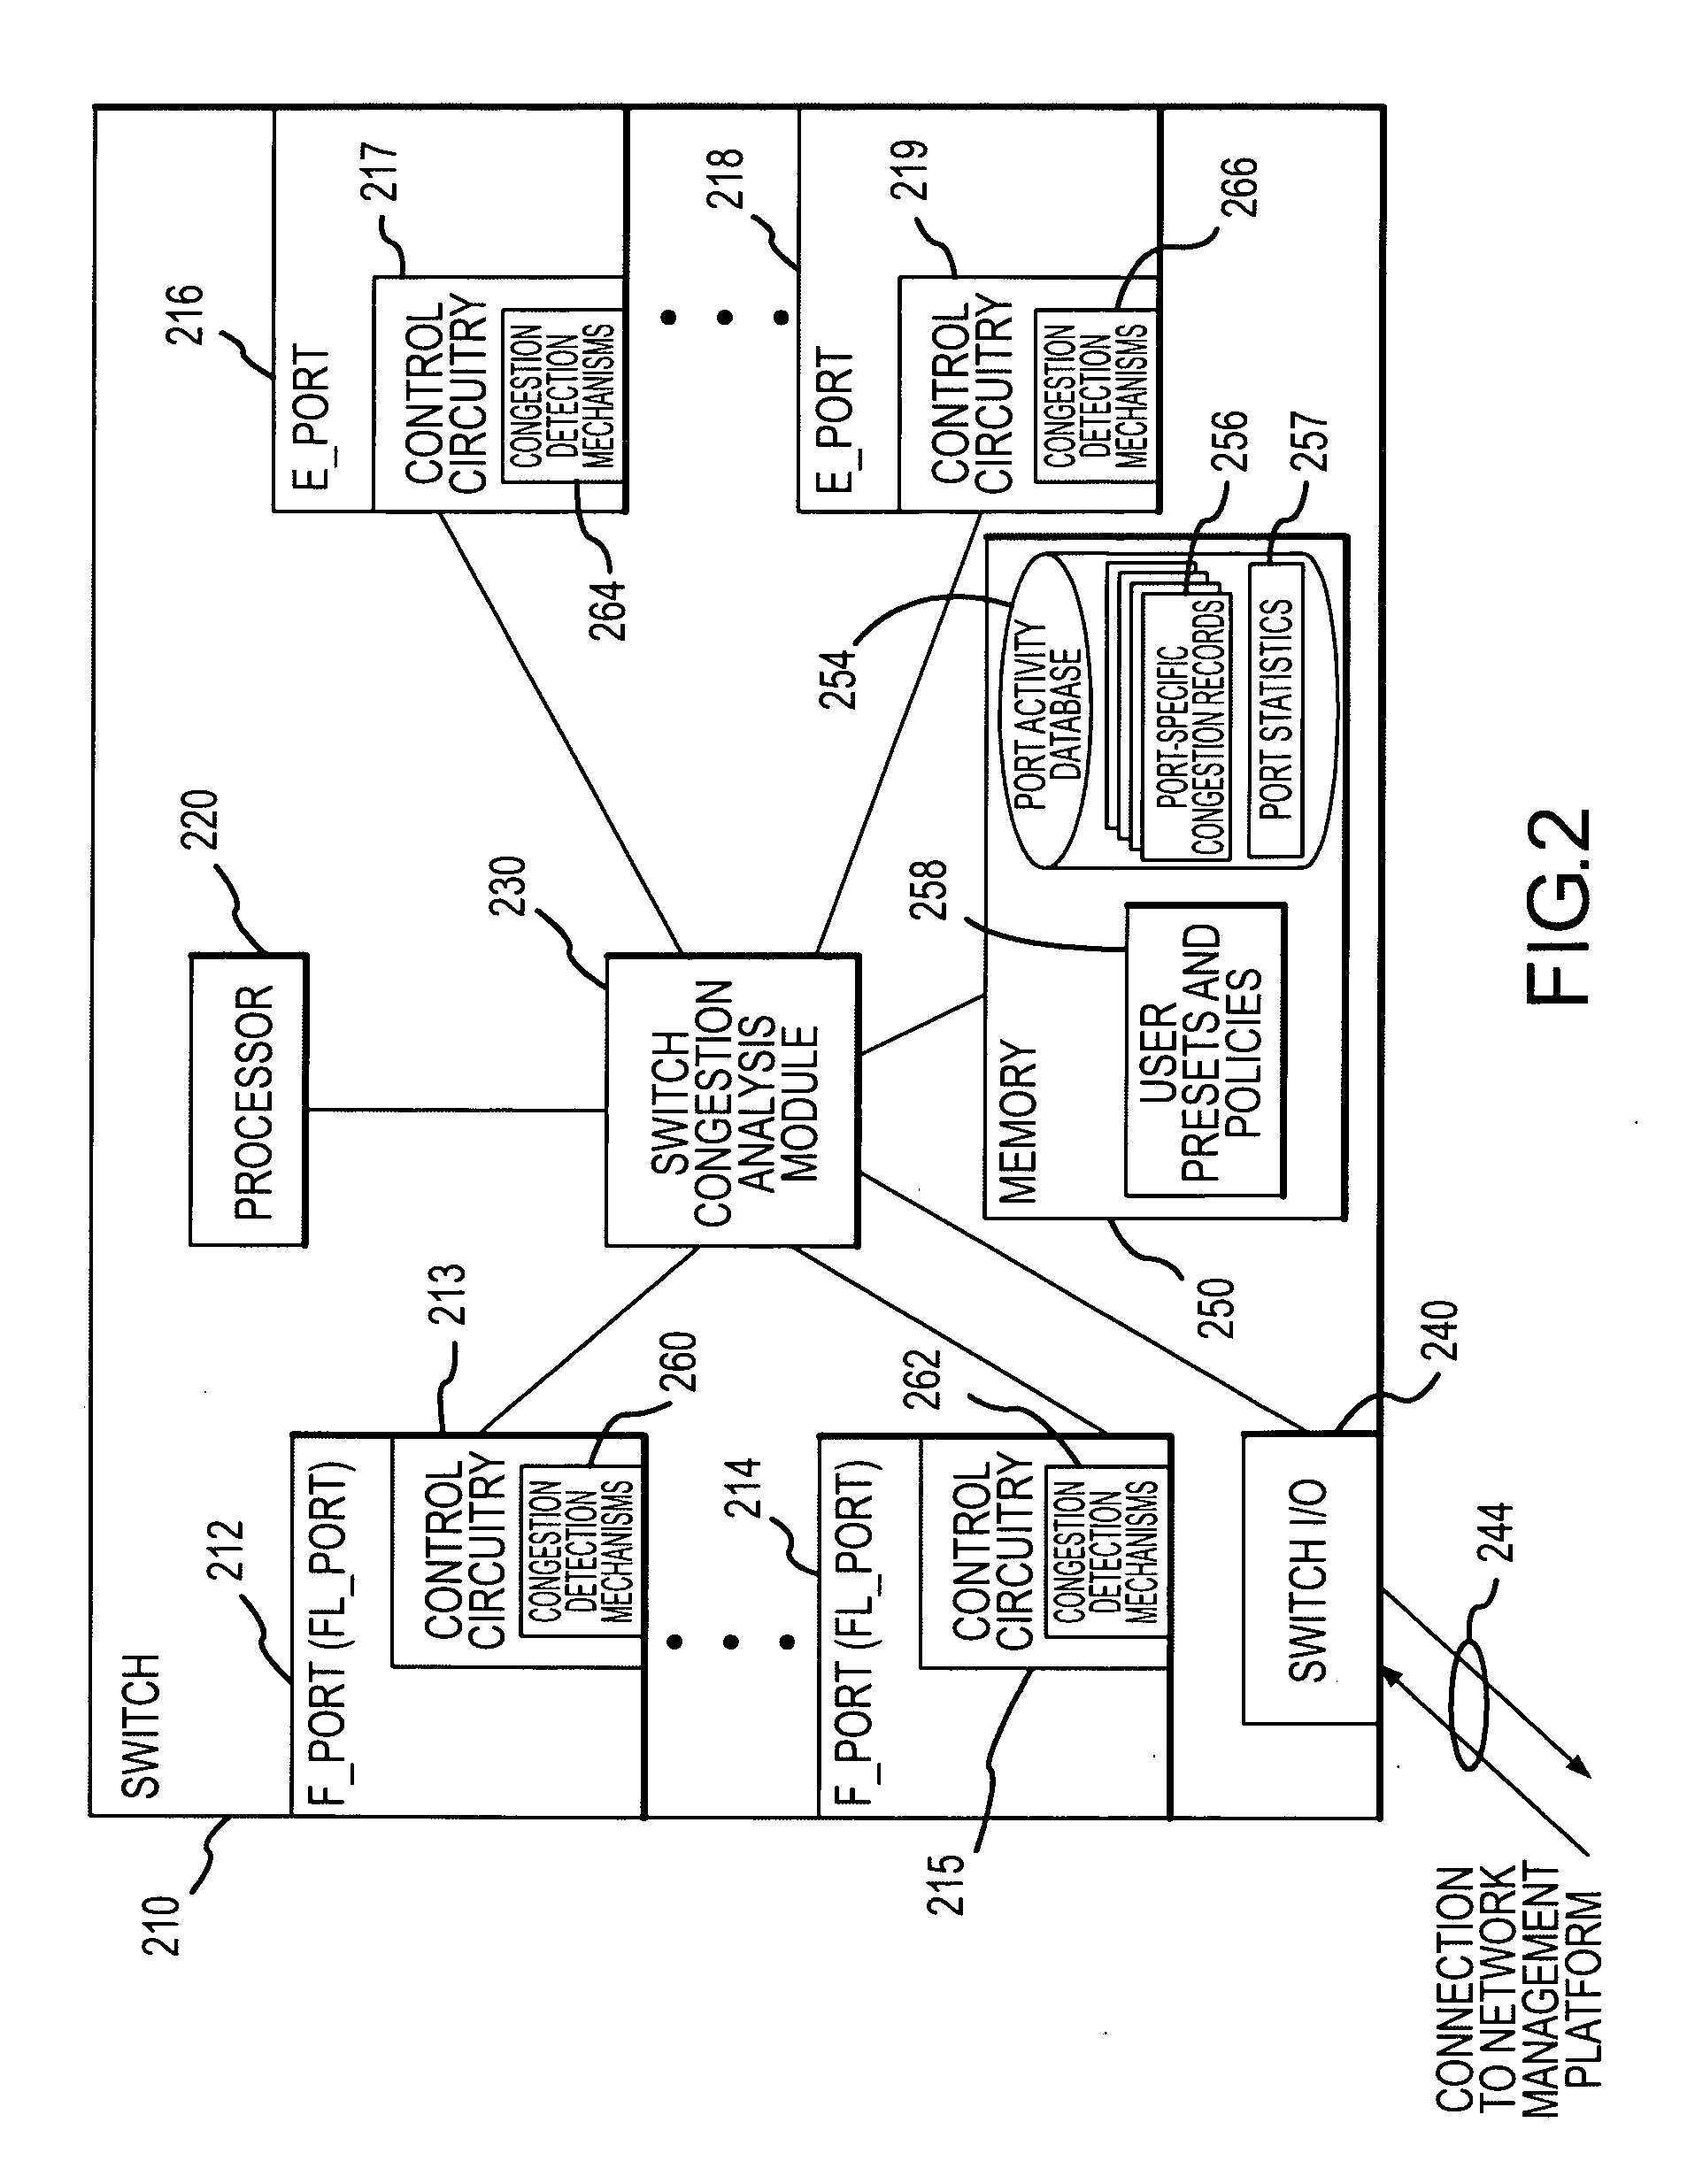 Method of detecting and monitoring fabric congestion